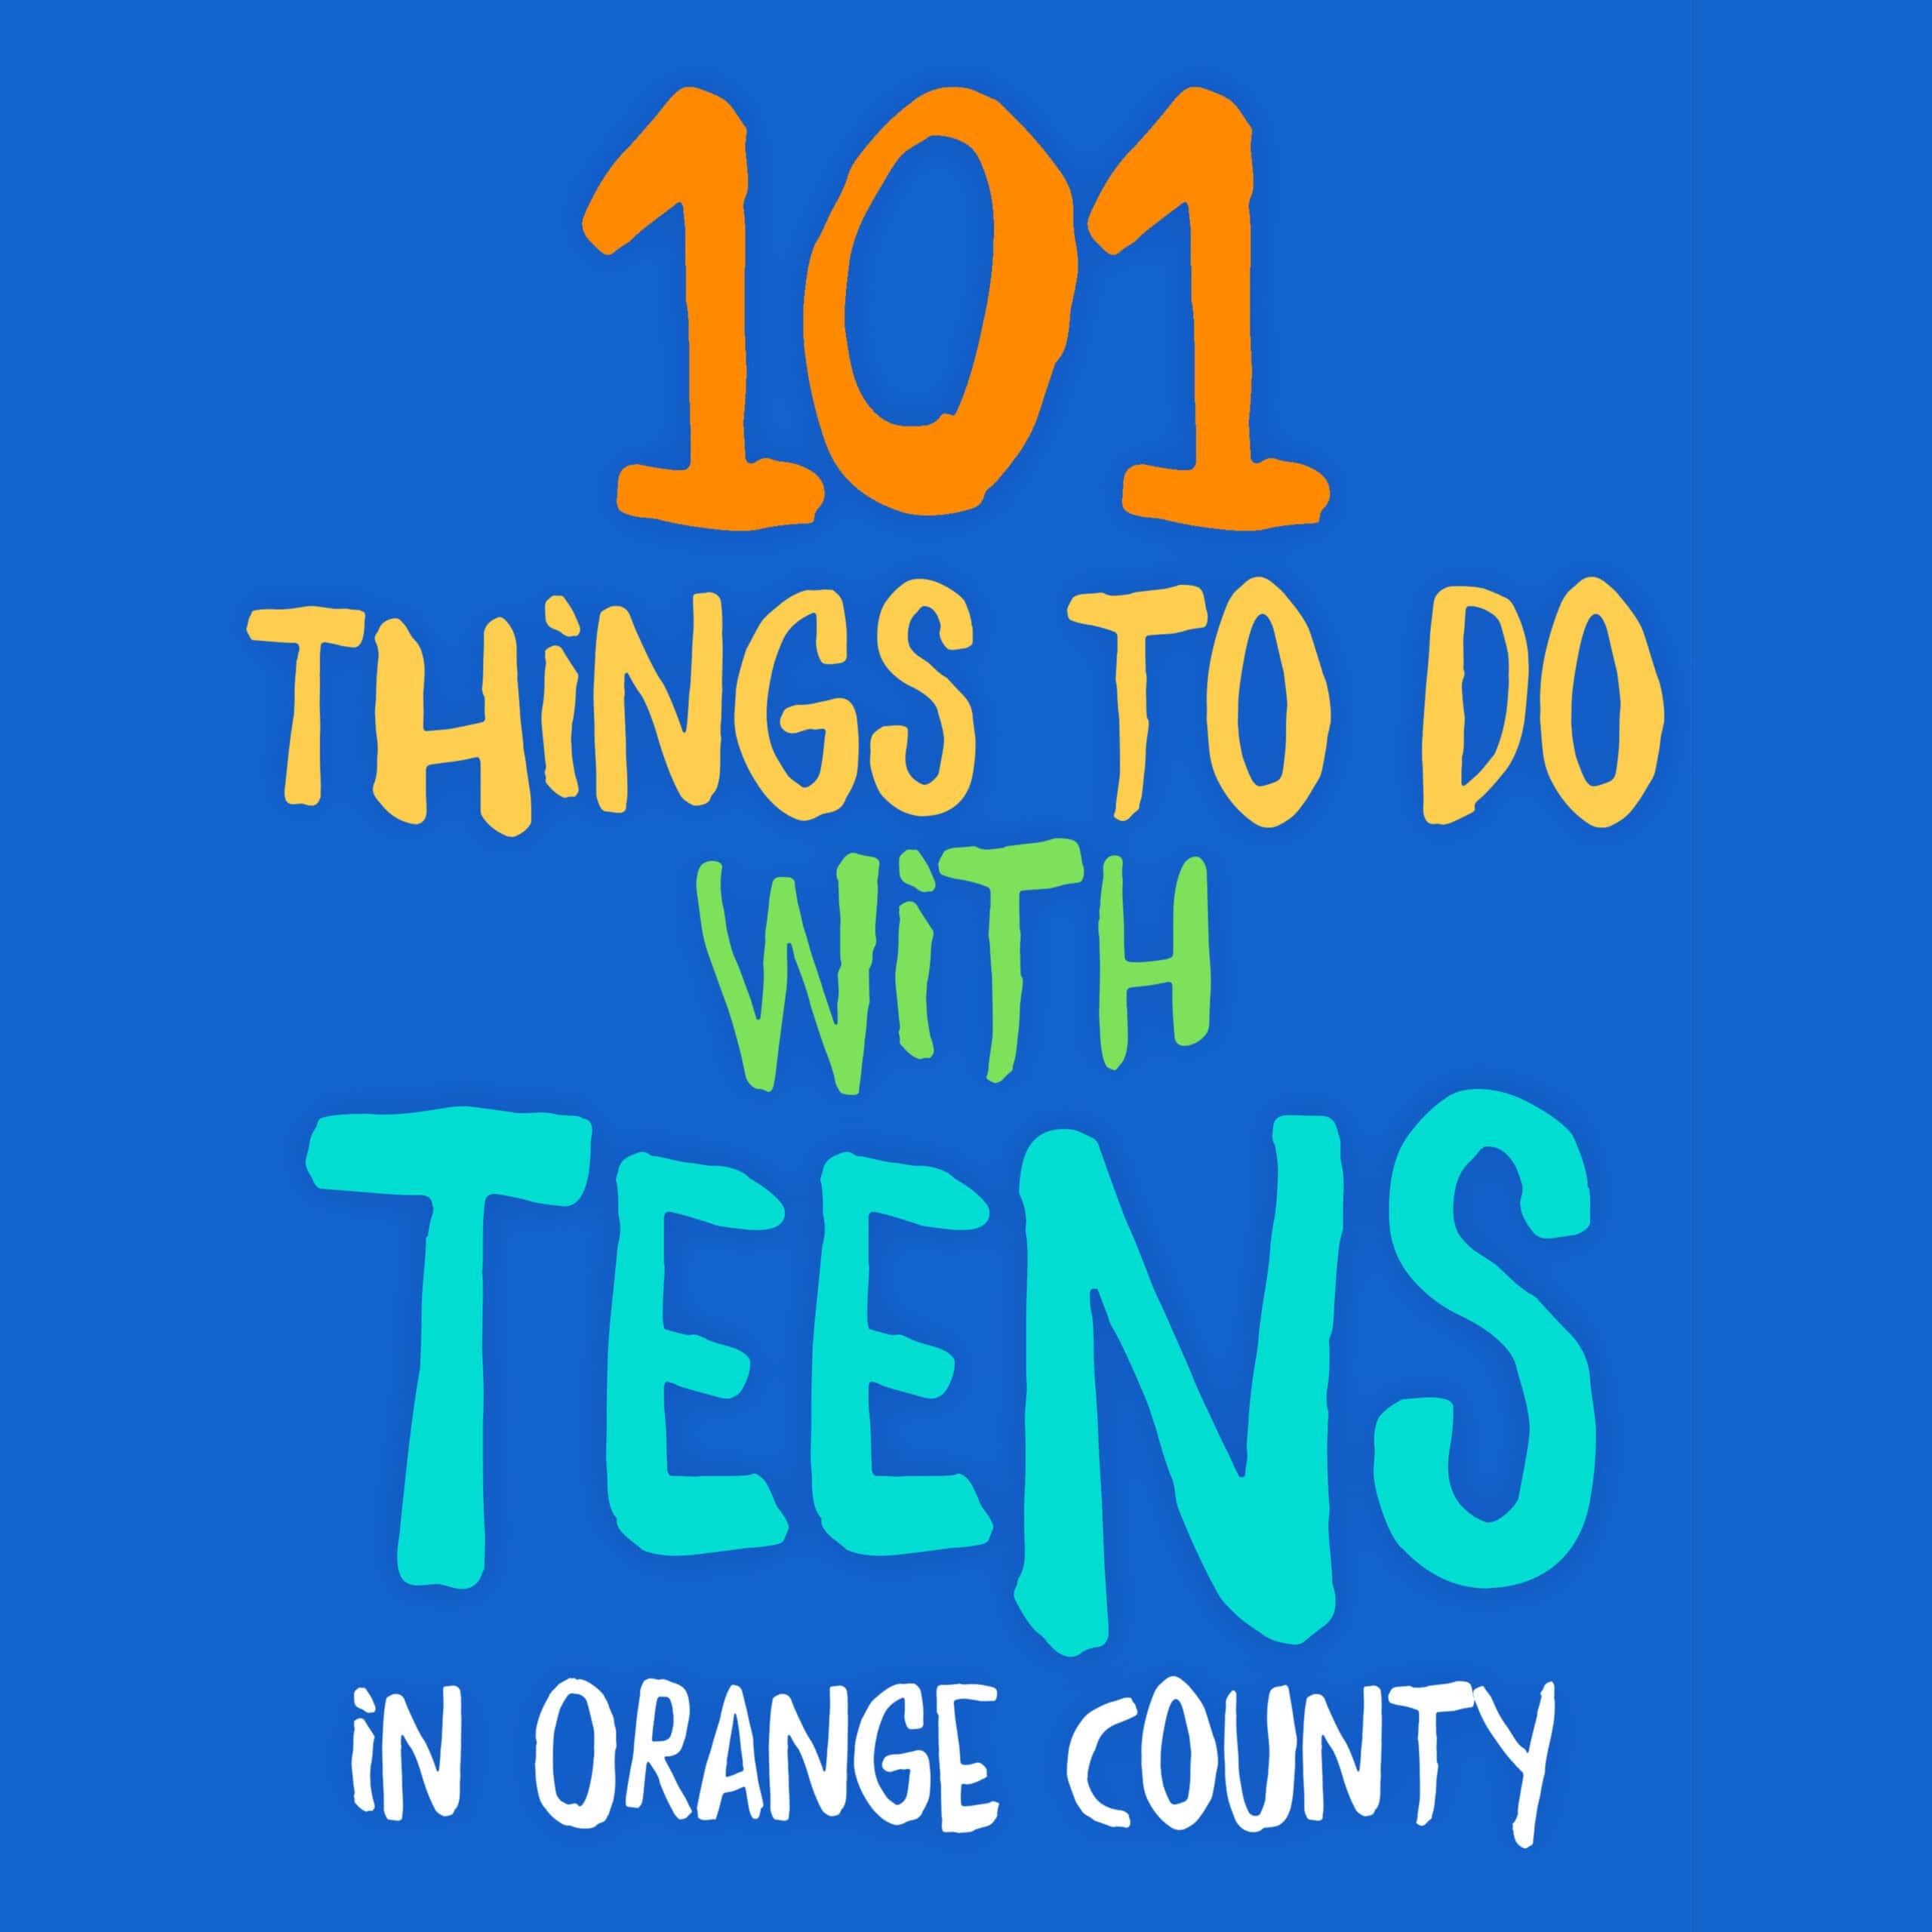 101 Things to Do with Teens and Places to Go in Orange County California